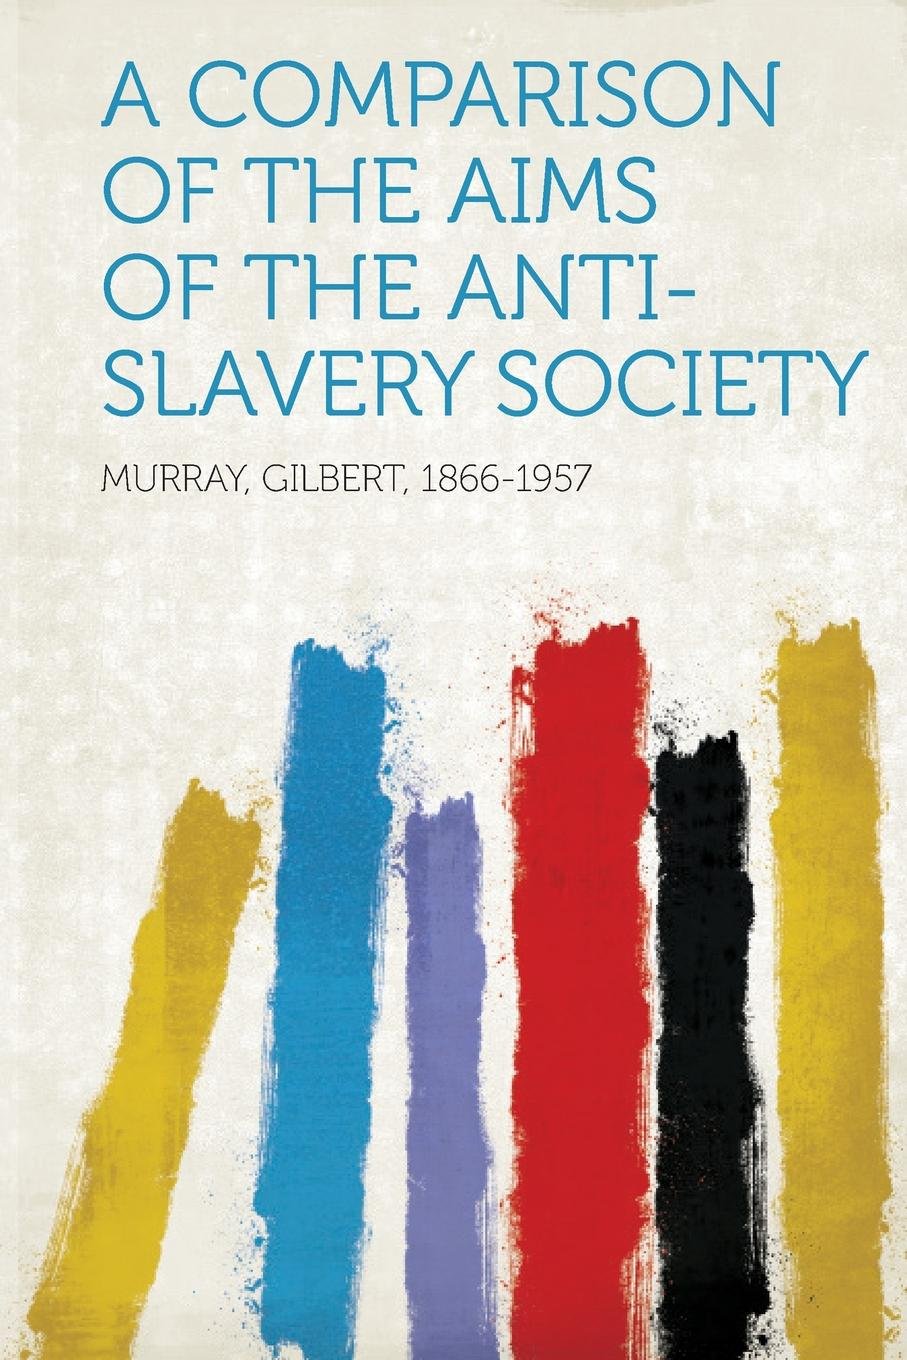 A Comparison of the Aims of the Anti-Slavery Society